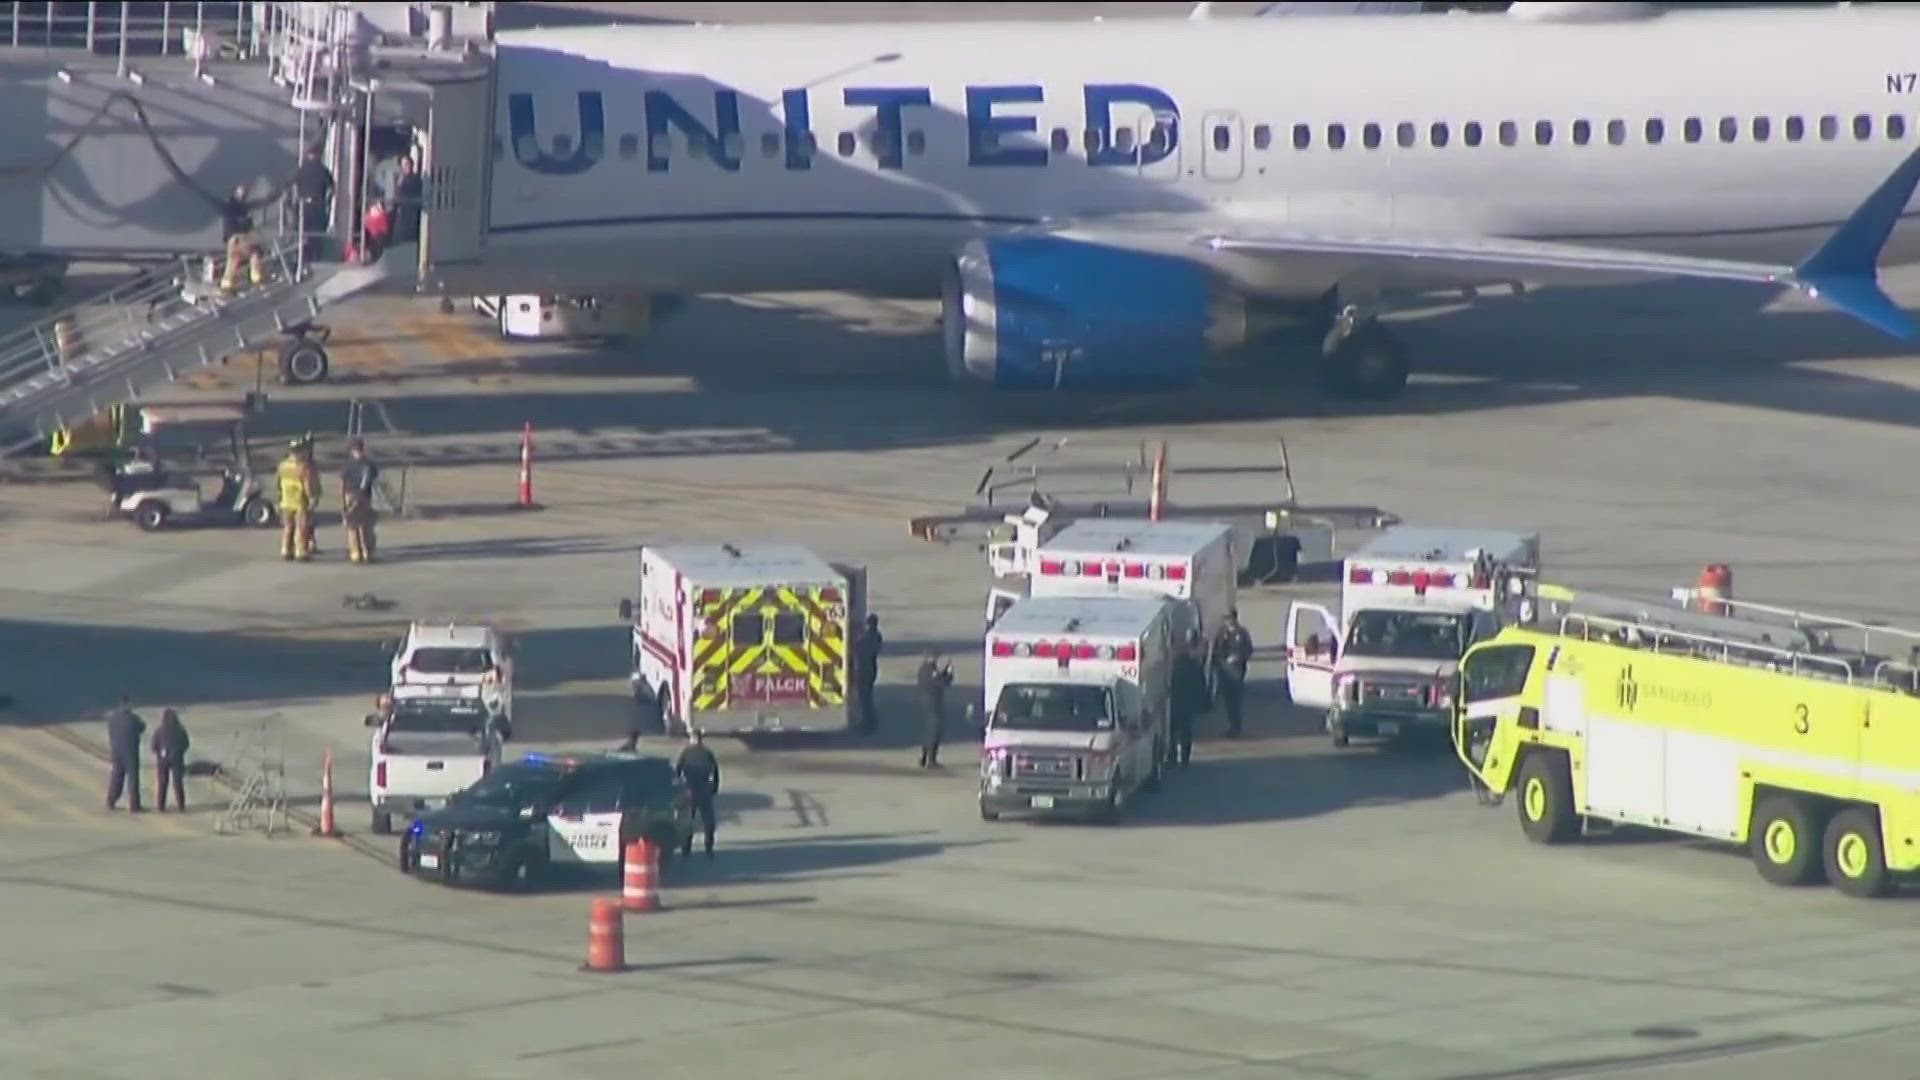 A United Airlines flight that took off from San Diego Tuesday morning returned back to the airport and made an emergency landing after a battery pack caught fire.